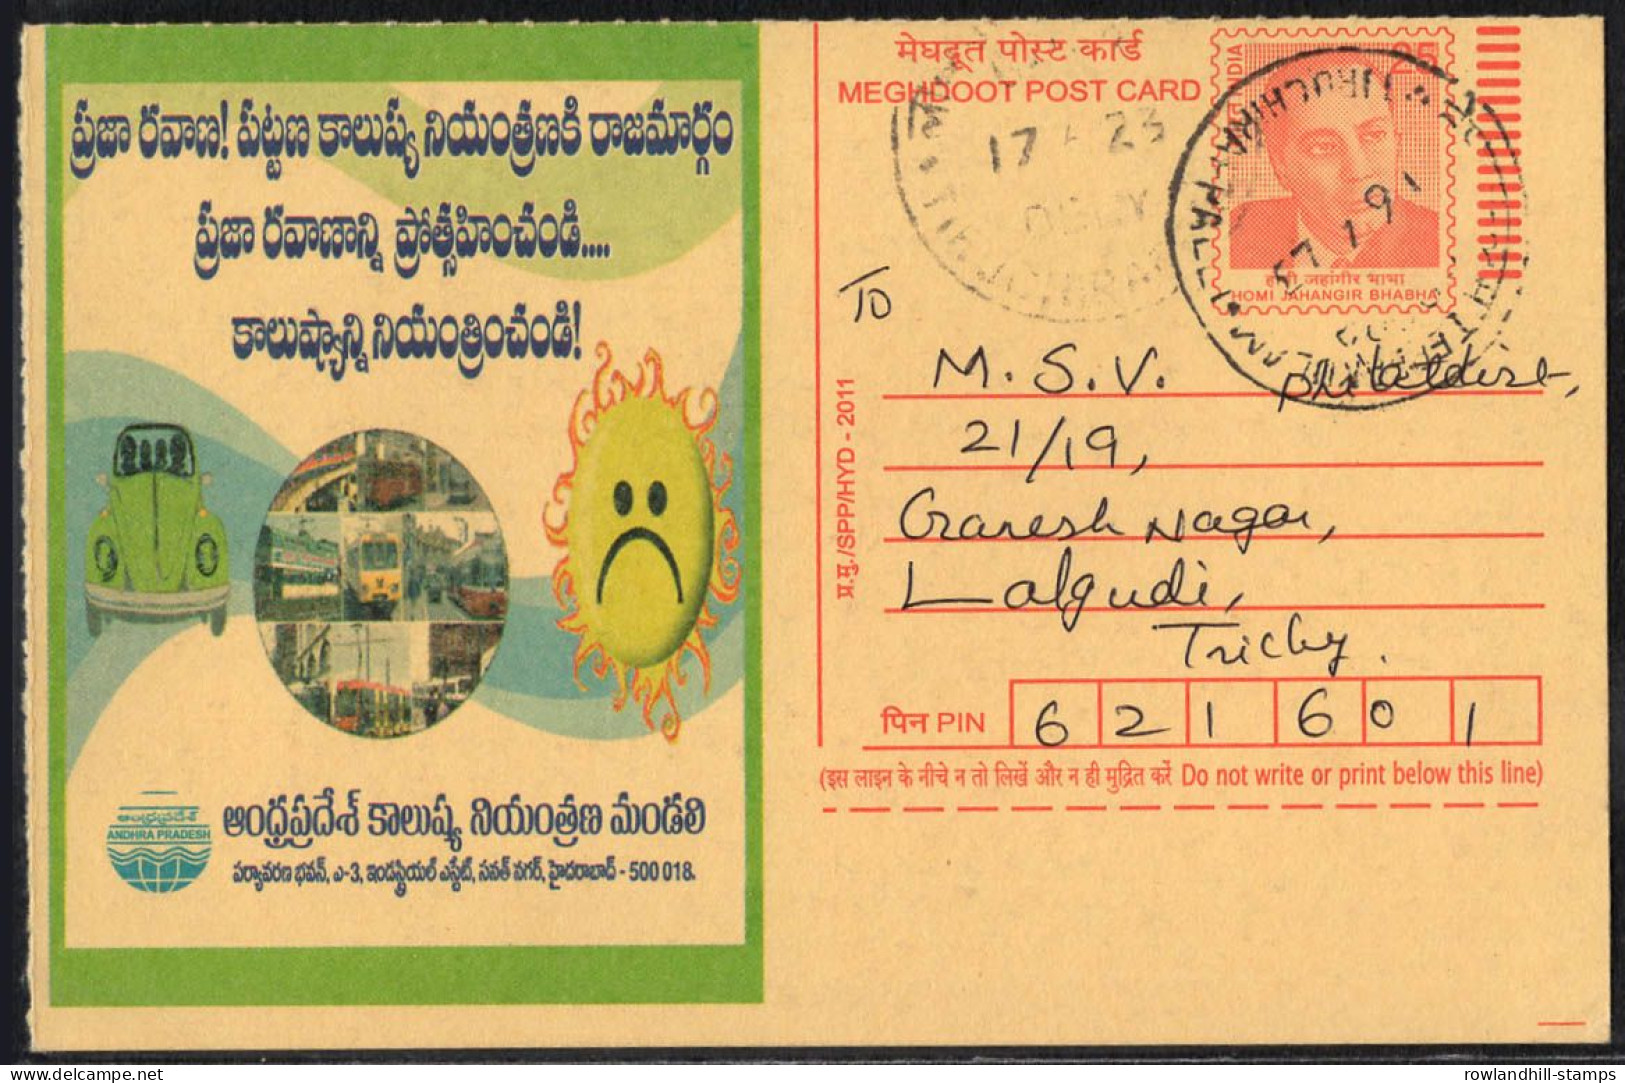 India, 2011, SAVE WATER, WATER CONSERVATION, Meghdoot Post Card, Used, Environment, Postcard, Energy, Sun, Andhra, B23 - Wasser